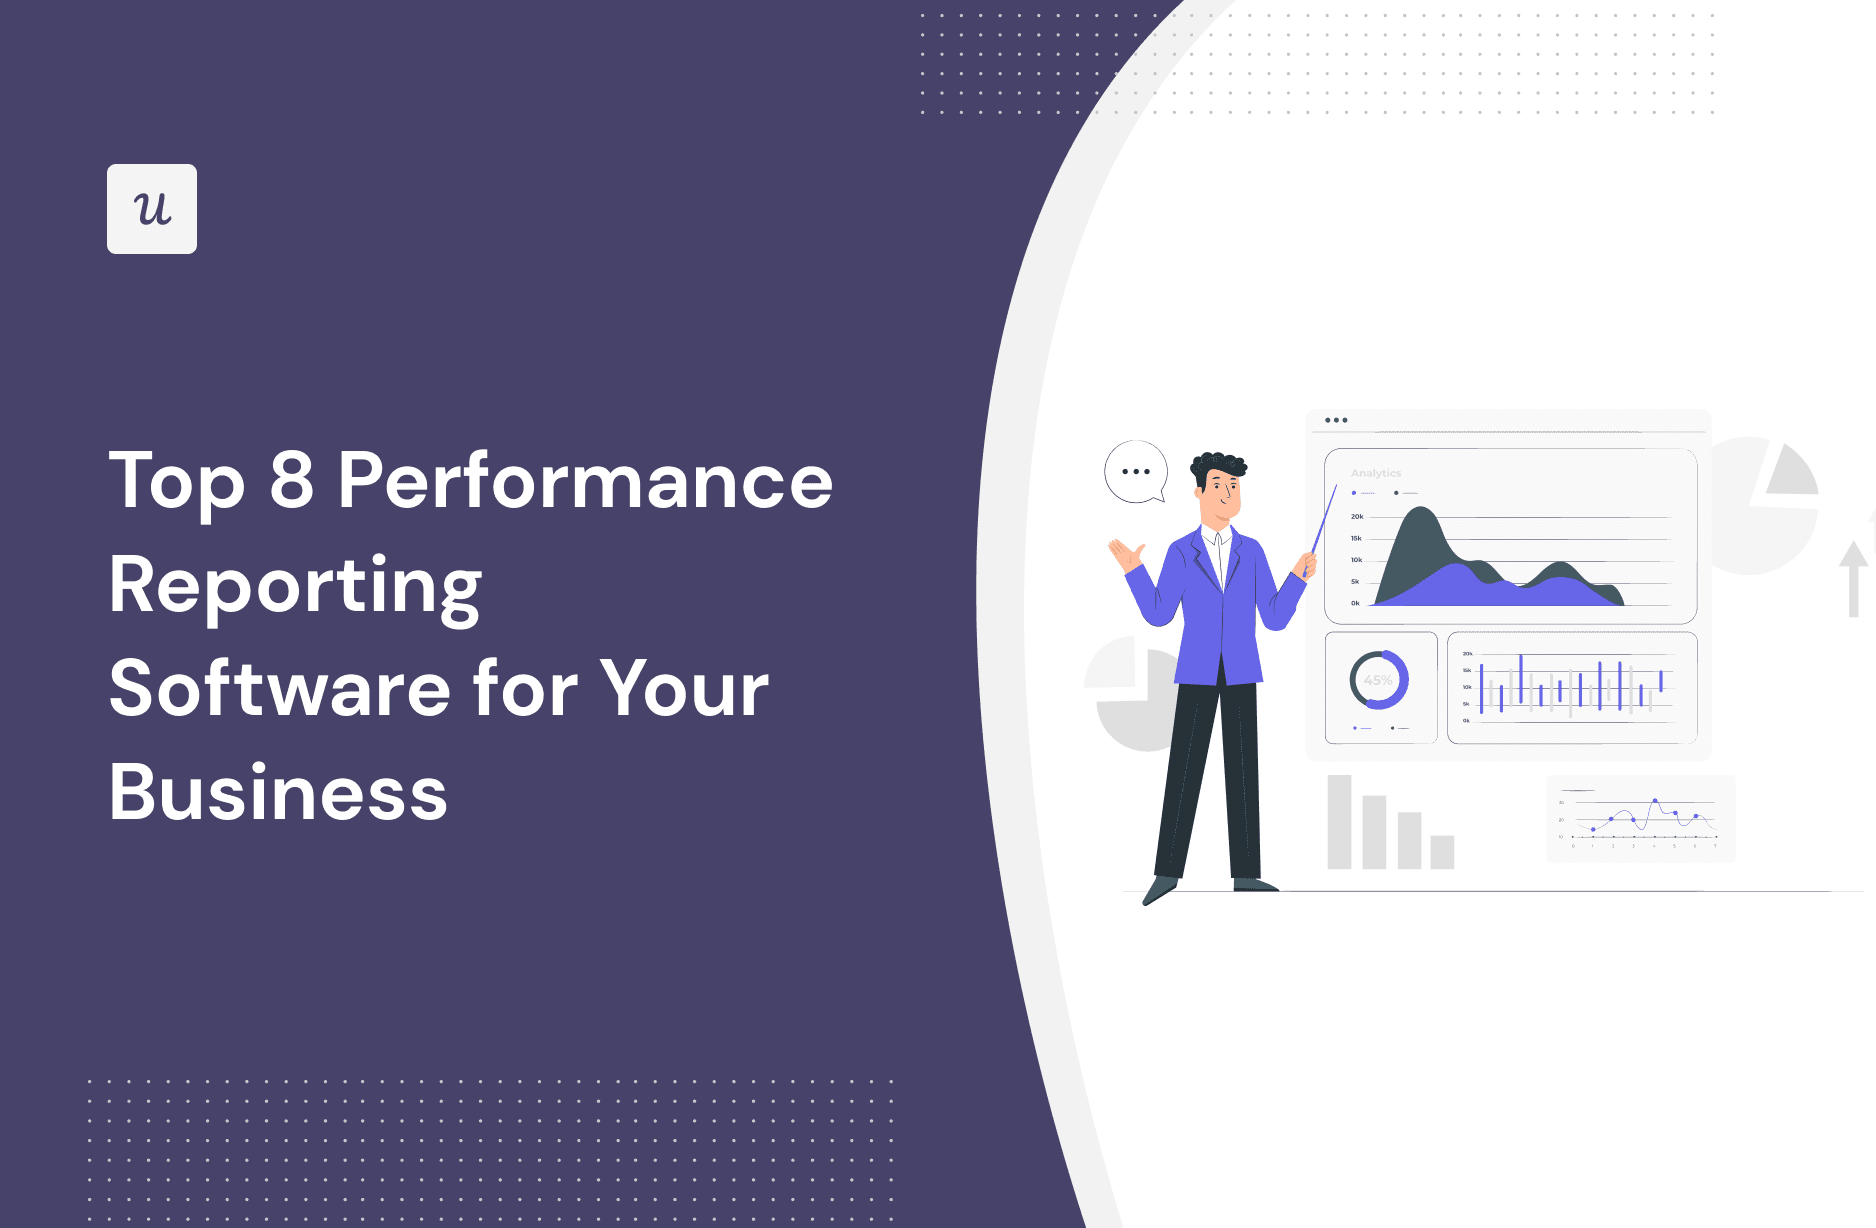 Top 8 Performance Reporting Software for Your Business cover